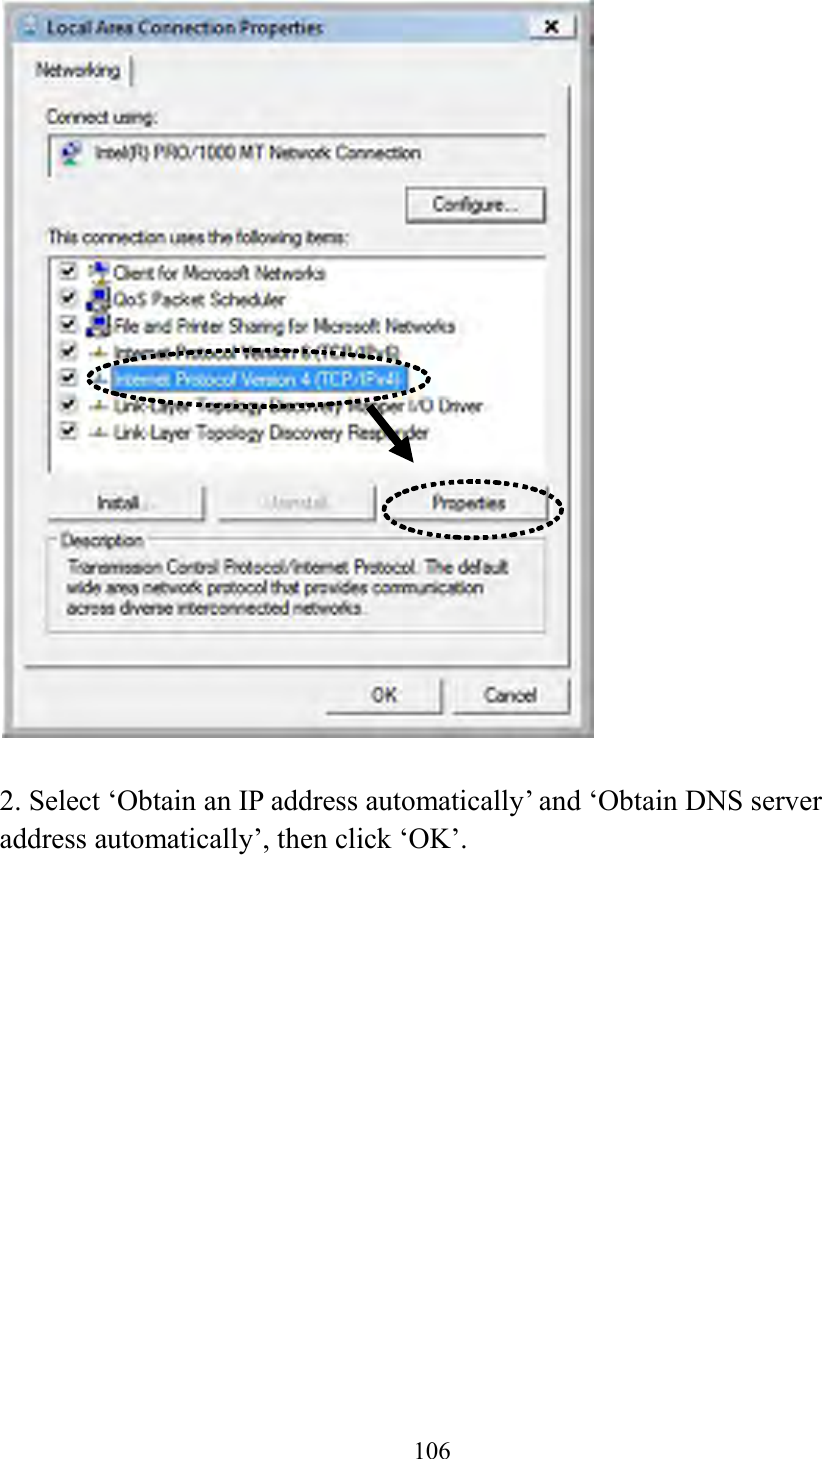  106    2. Select ‘Obtain an IP address automatically’ and ‘Obtain DNS server address automatically’, then click ‘OK’.  